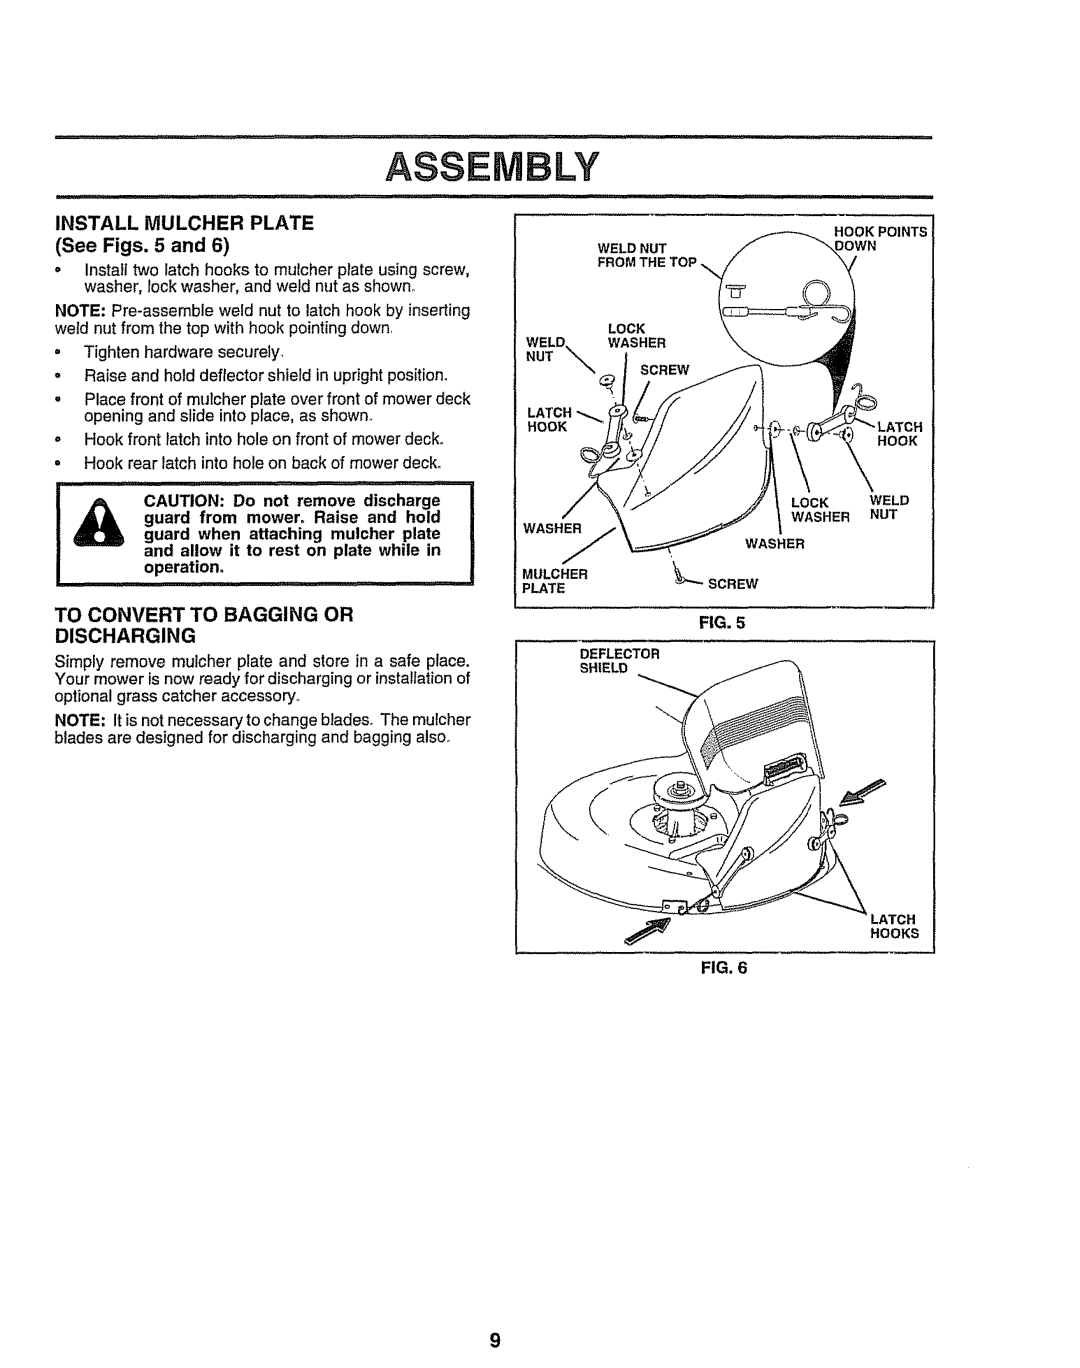 Sears 917.258473 owner manual Asse Bly, Ut, INSTALL MULCHER PLATE See Figs. 5 and, To Convert To Bagging Or Discharging 